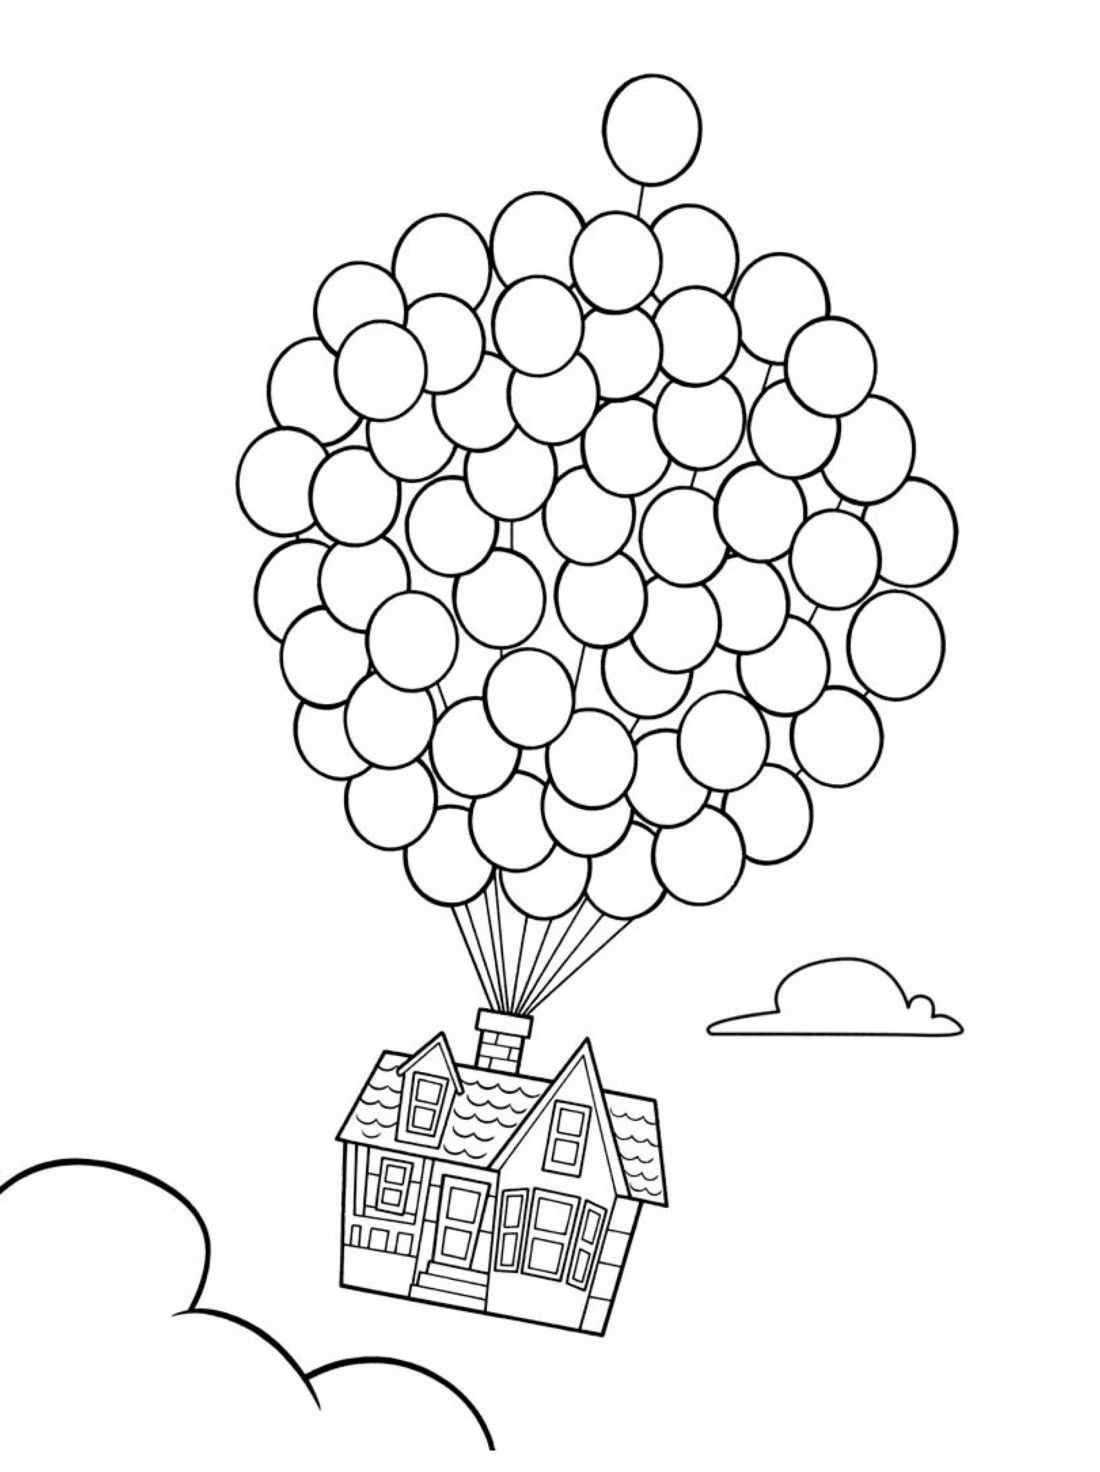 Up House and Balloons Coloring Page